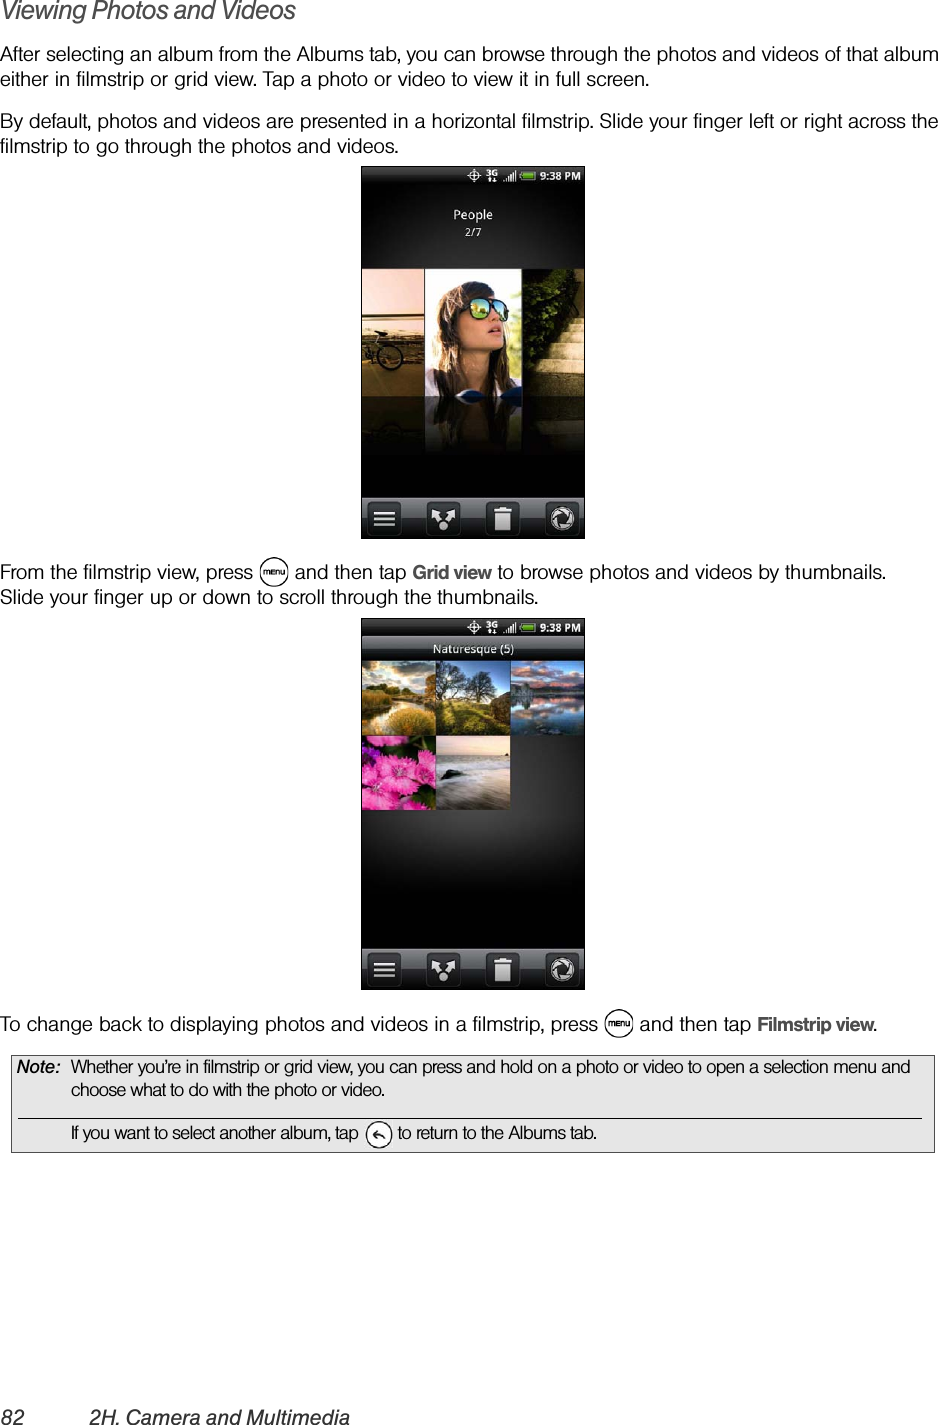 82 2H. Camera and MultimediaViewing Photos and VideosAfter selecting an album from the Albums tab, you can browse through the photos and videos of that album either in filmstrip or grid view. Tap a photo or video to view it in full screen.By default, photos and videos are presented in a horizontal filmstrip. Slide your finger left or right across the filmstrip to go through the photos and videos.From the filmstrip view, press   and then tap Grid view to browse photos and videos by thumbnails. Slide your finger up or down to scroll through the thumbnails.To change back to displaying photos and videos in a filmstrip, press   and then tap Filmstrip view.Note: Whether you’re in filmstrip or grid view, you can press and hold on a photo or video to open a selection menu and choose what to do with the photo or video.If you want to select another album, tap   to return to the Albums tab.